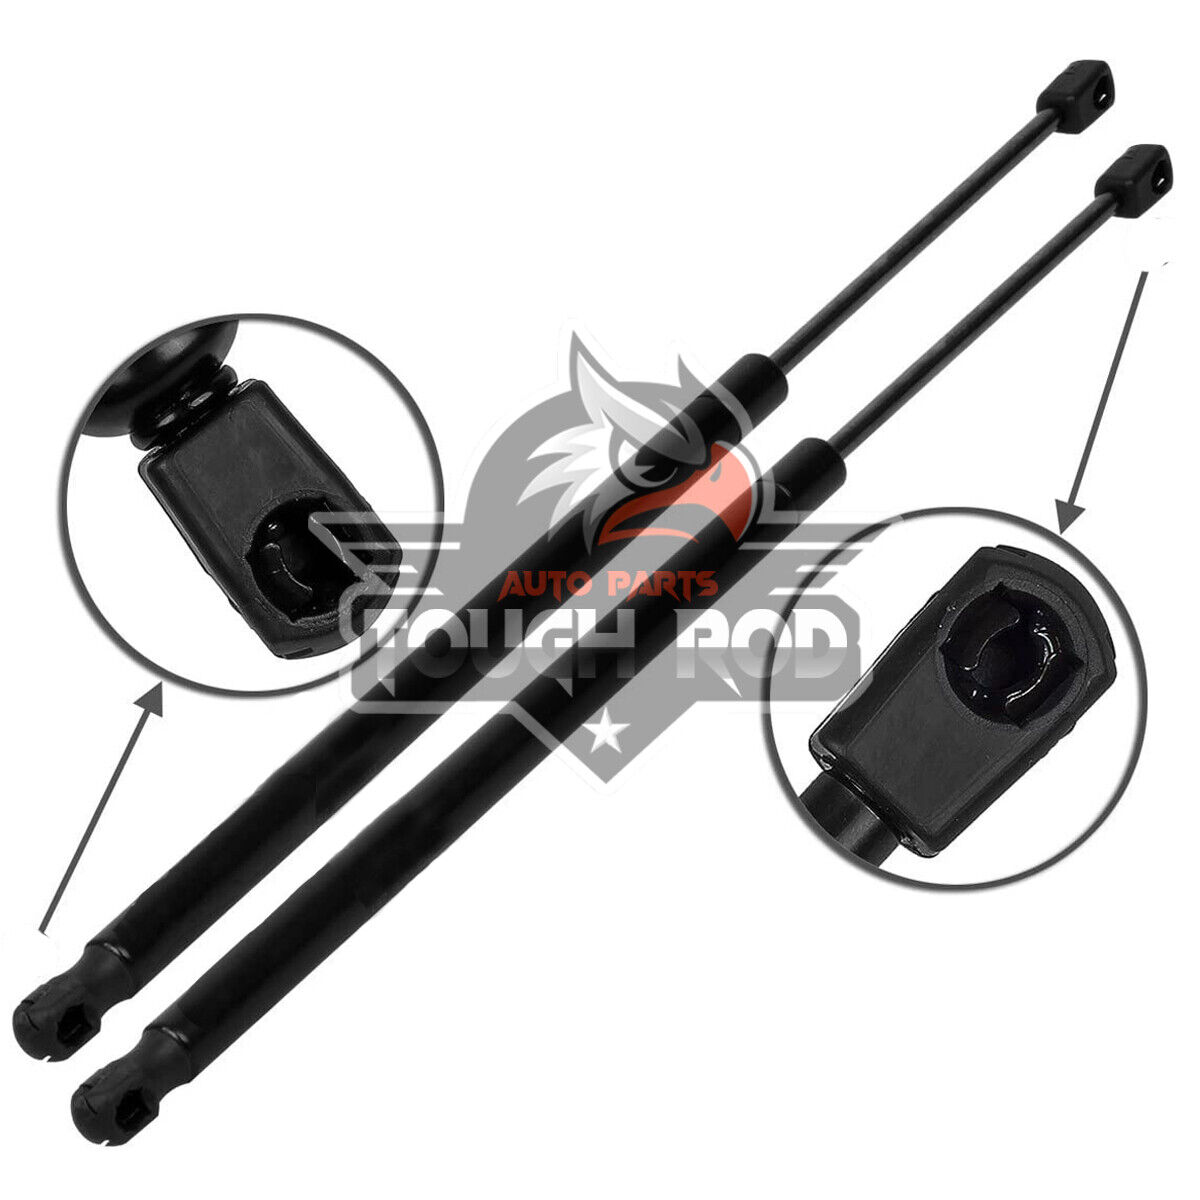 2X REAR TRUNK LID LIFT SUPPORTS SHOCKS STRUTS PROPS RODS FITS 94-04 FORD MUSTANG